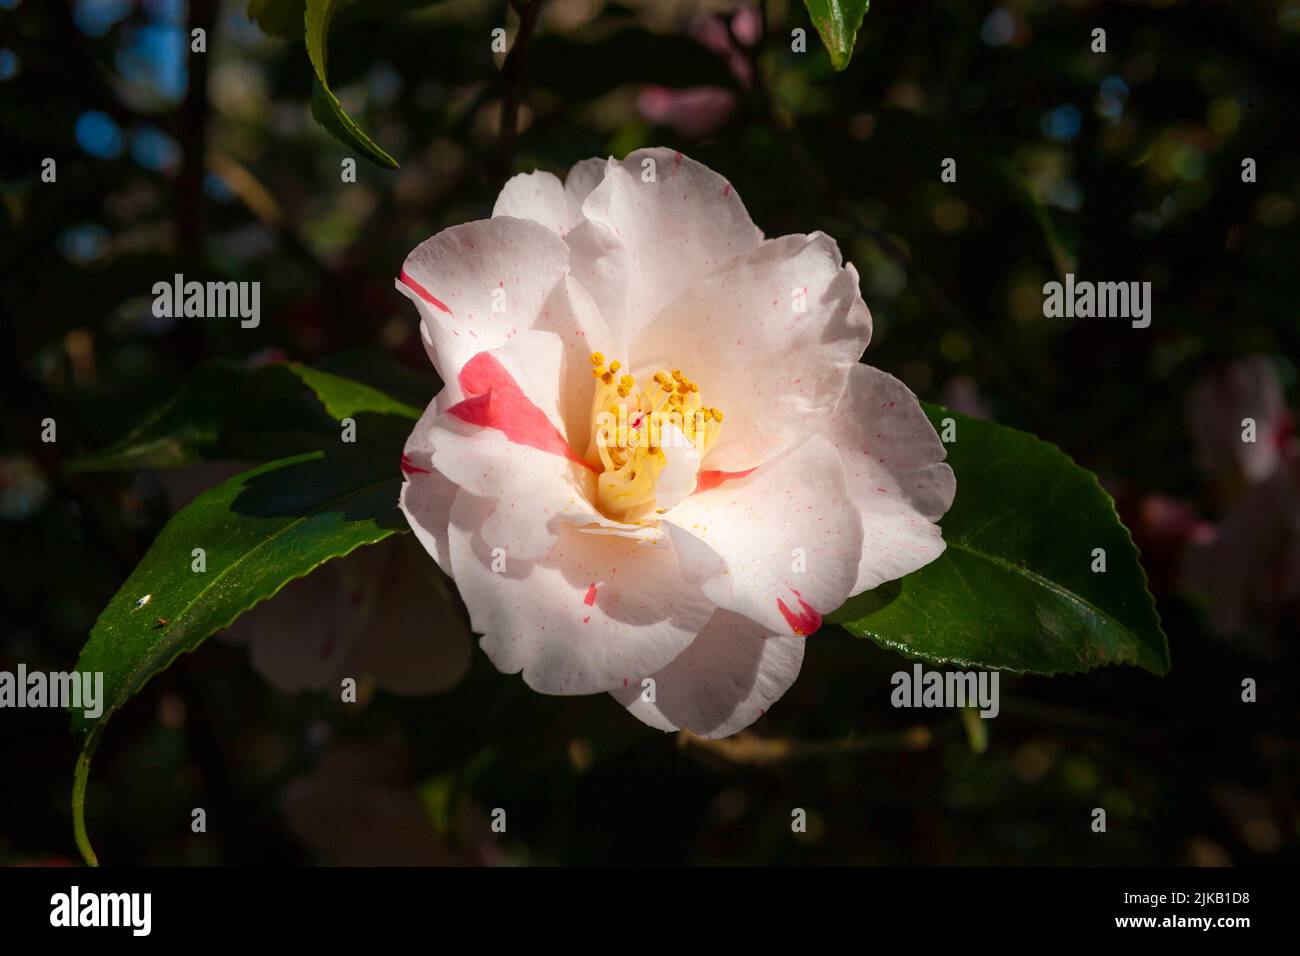 Close-up of a single Spring-flowering white and pink Camellia flower, Leonardslee, West Sussex, England, UK Stock Photo